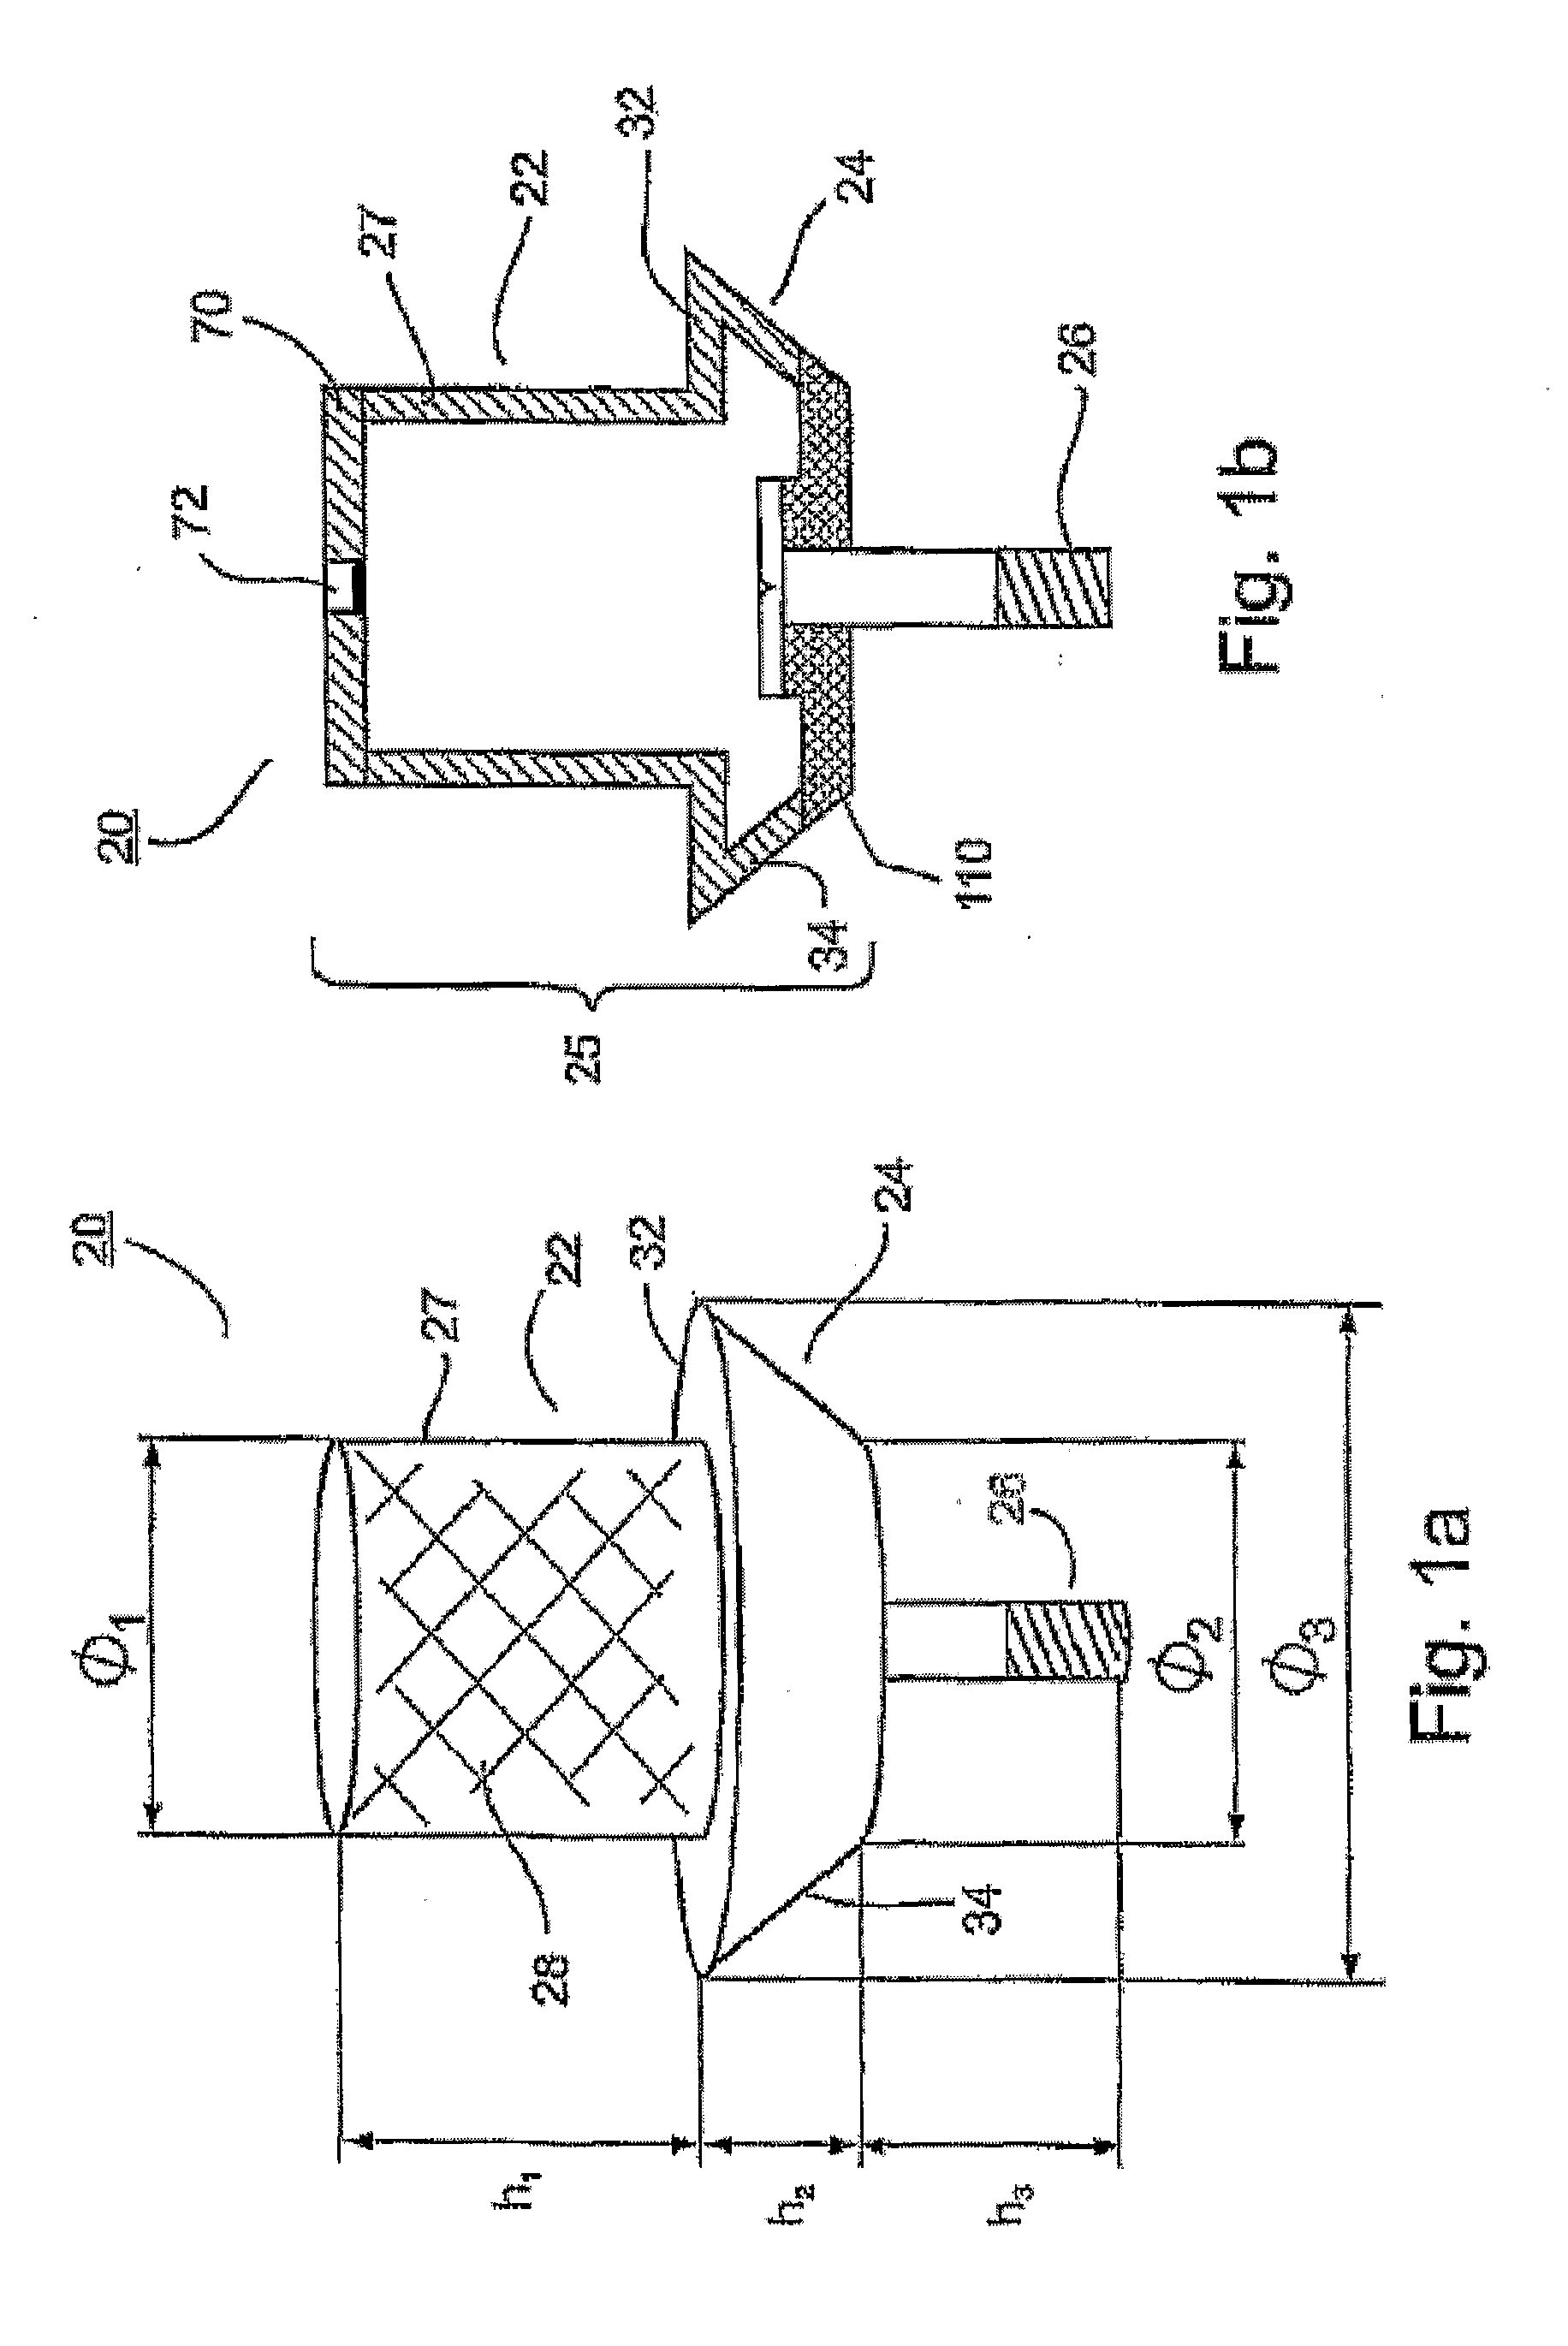 Disposable osteogenesis and osseointegration promotion and maintenance device for endosseous implants